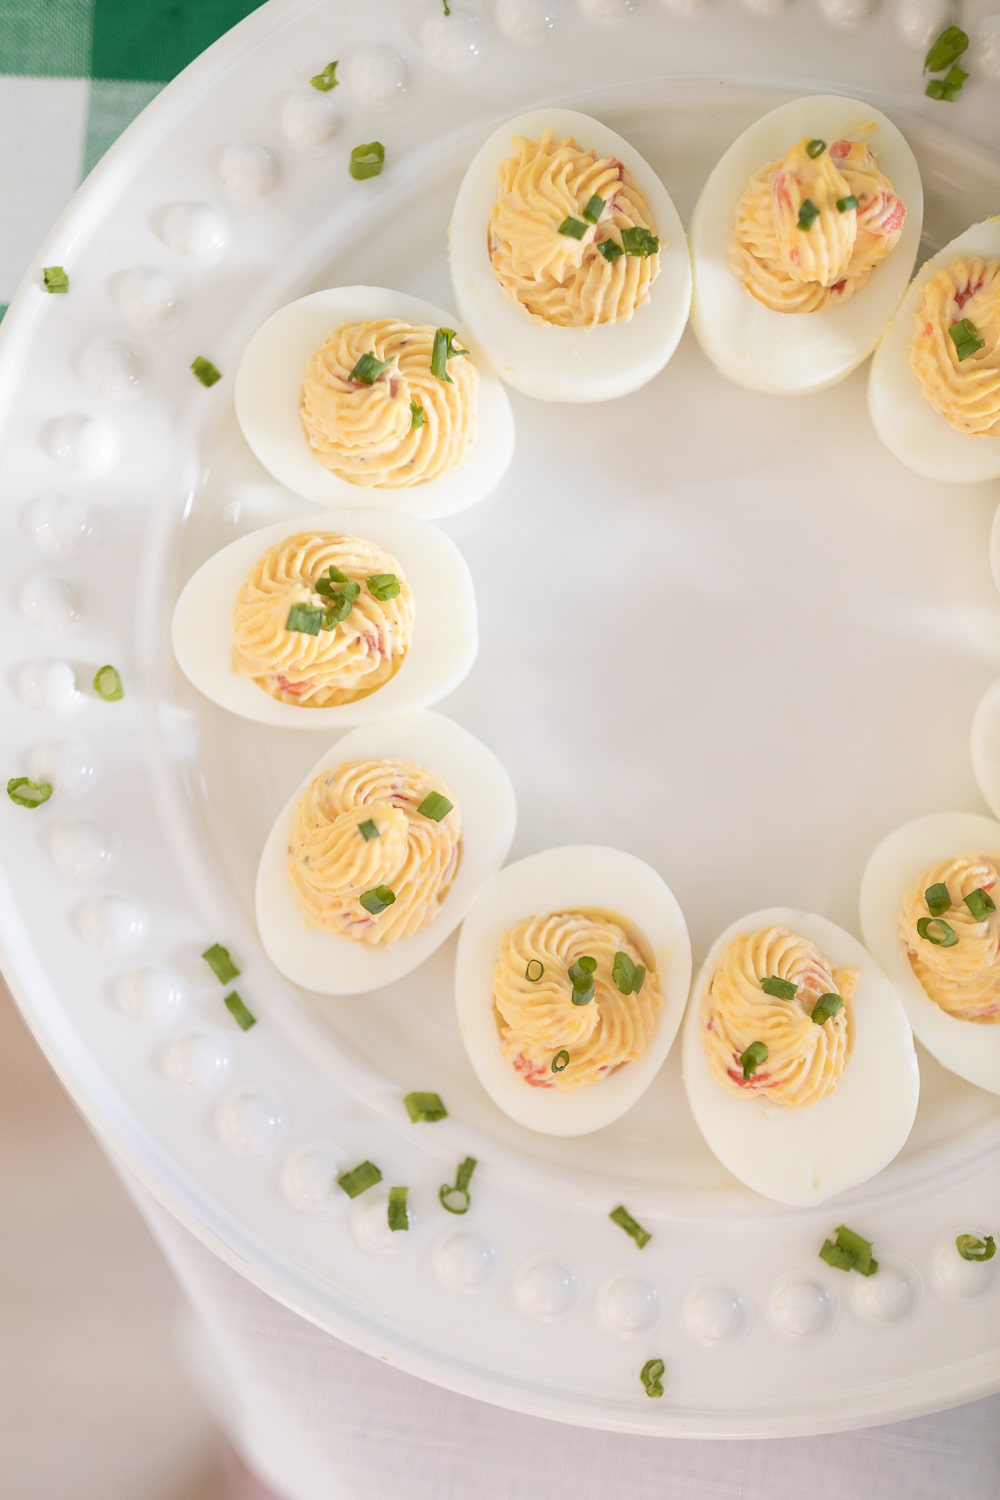 Pimento cheese deviled eggs recipe by southern blogger Stephanie Ziajka on Diary of a Debutante